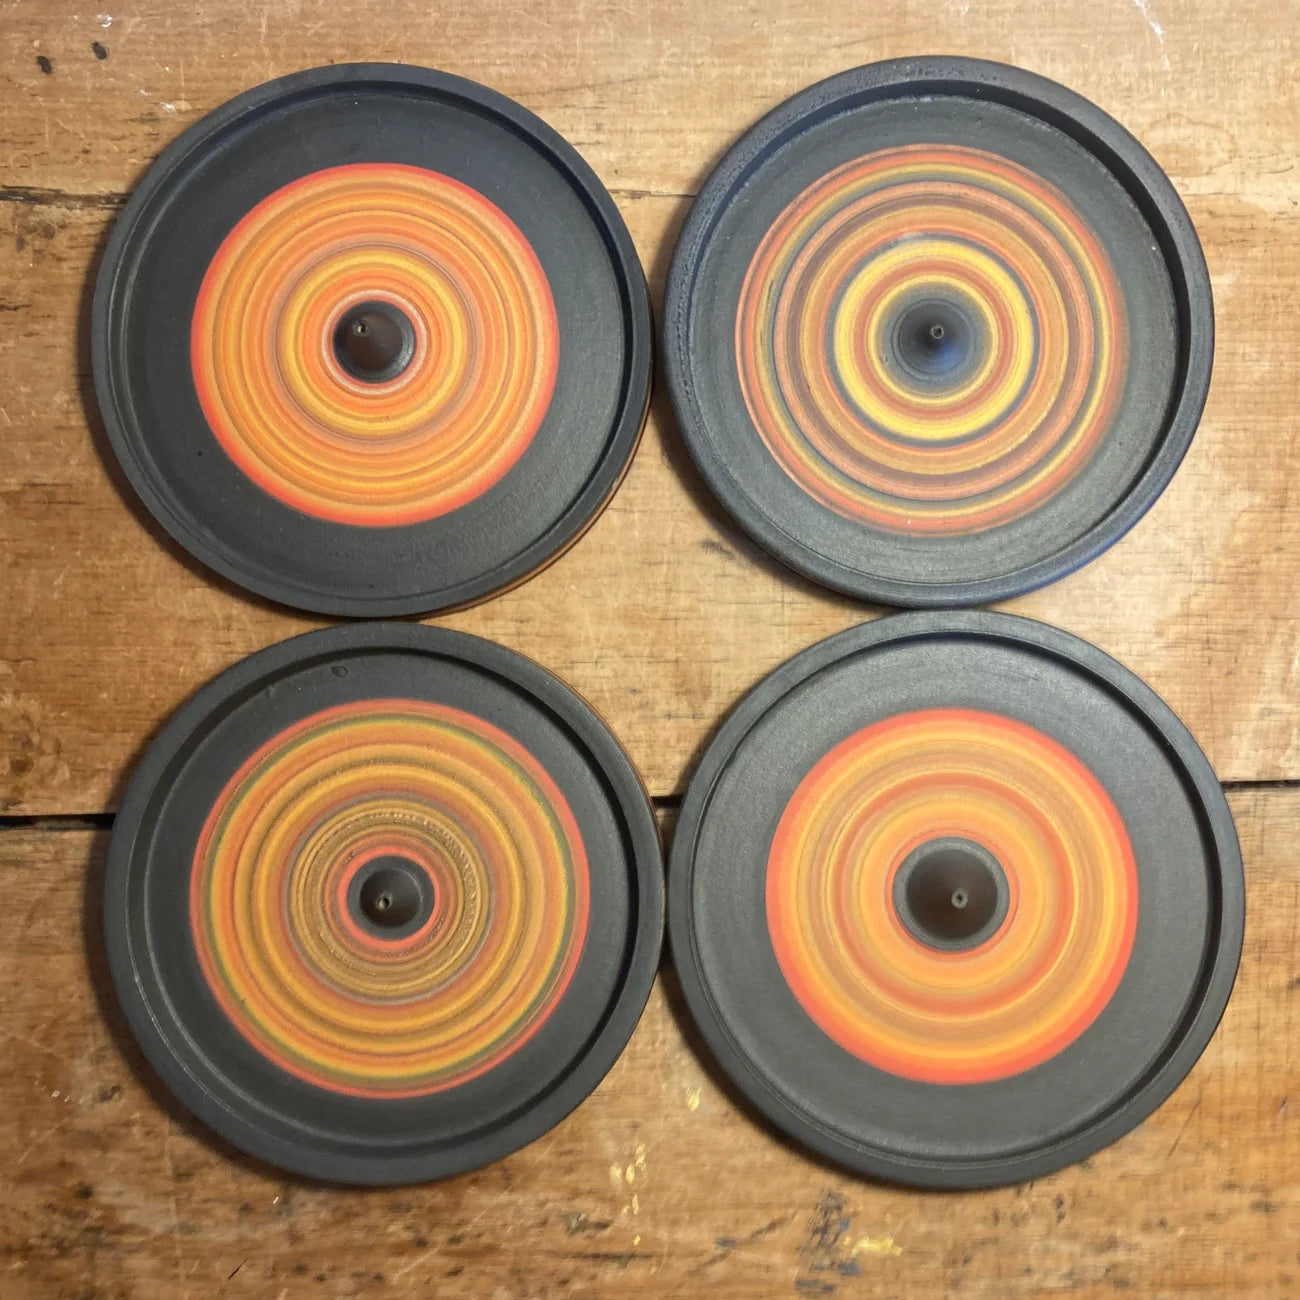 Sarah Daly Sunset Incense Holders - Radical Giving